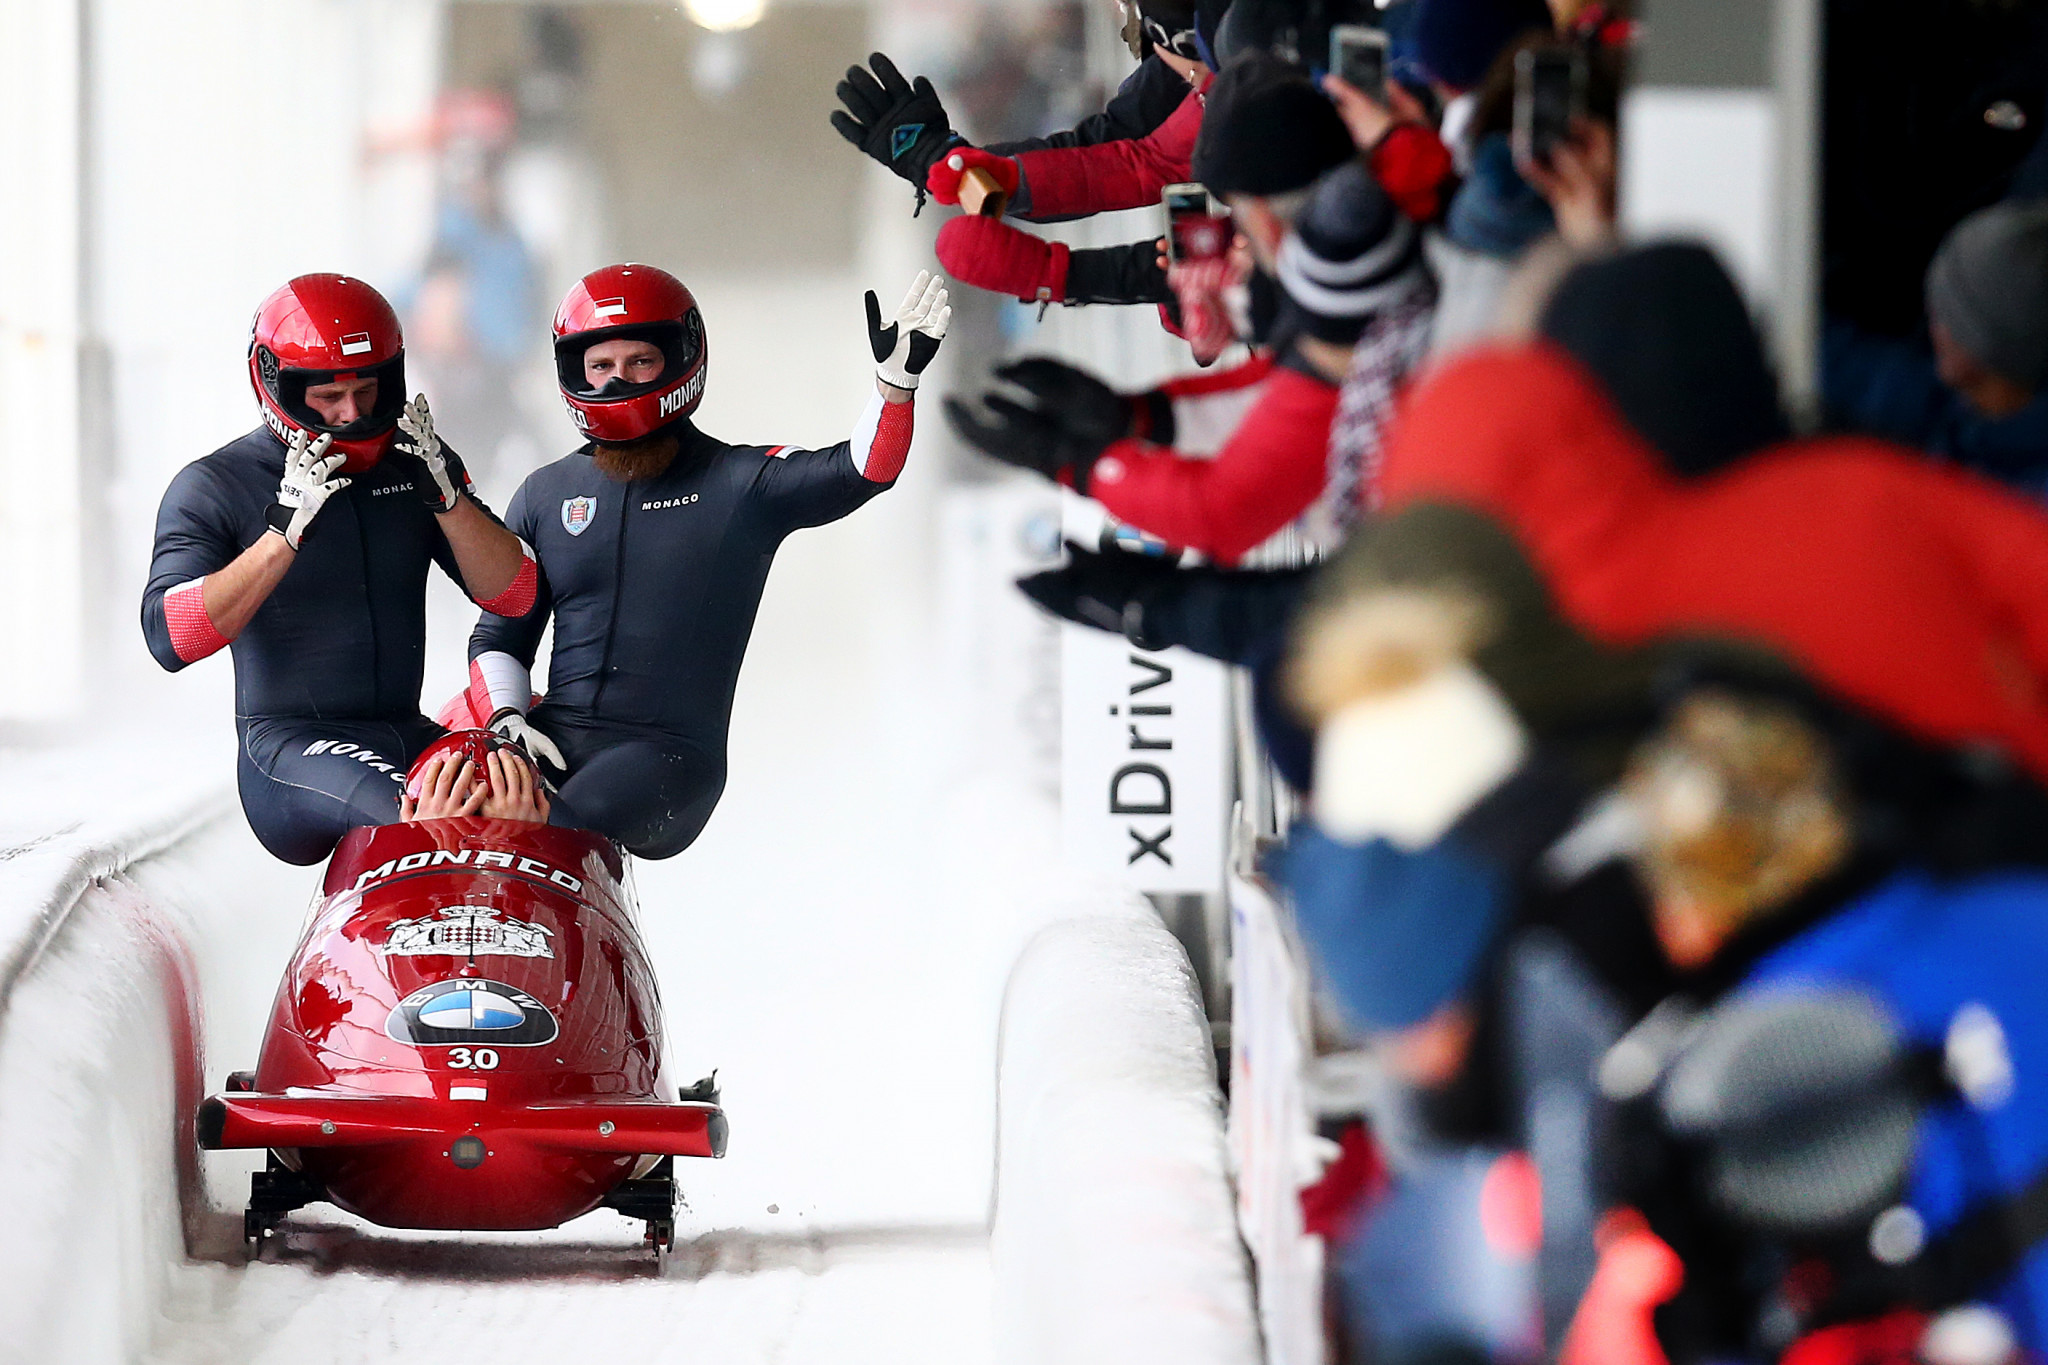 The International Bobsleigh and Skeleton Federation has vowed to implement an improved media and marketing strategy to adapt to new trends ©Getty Images